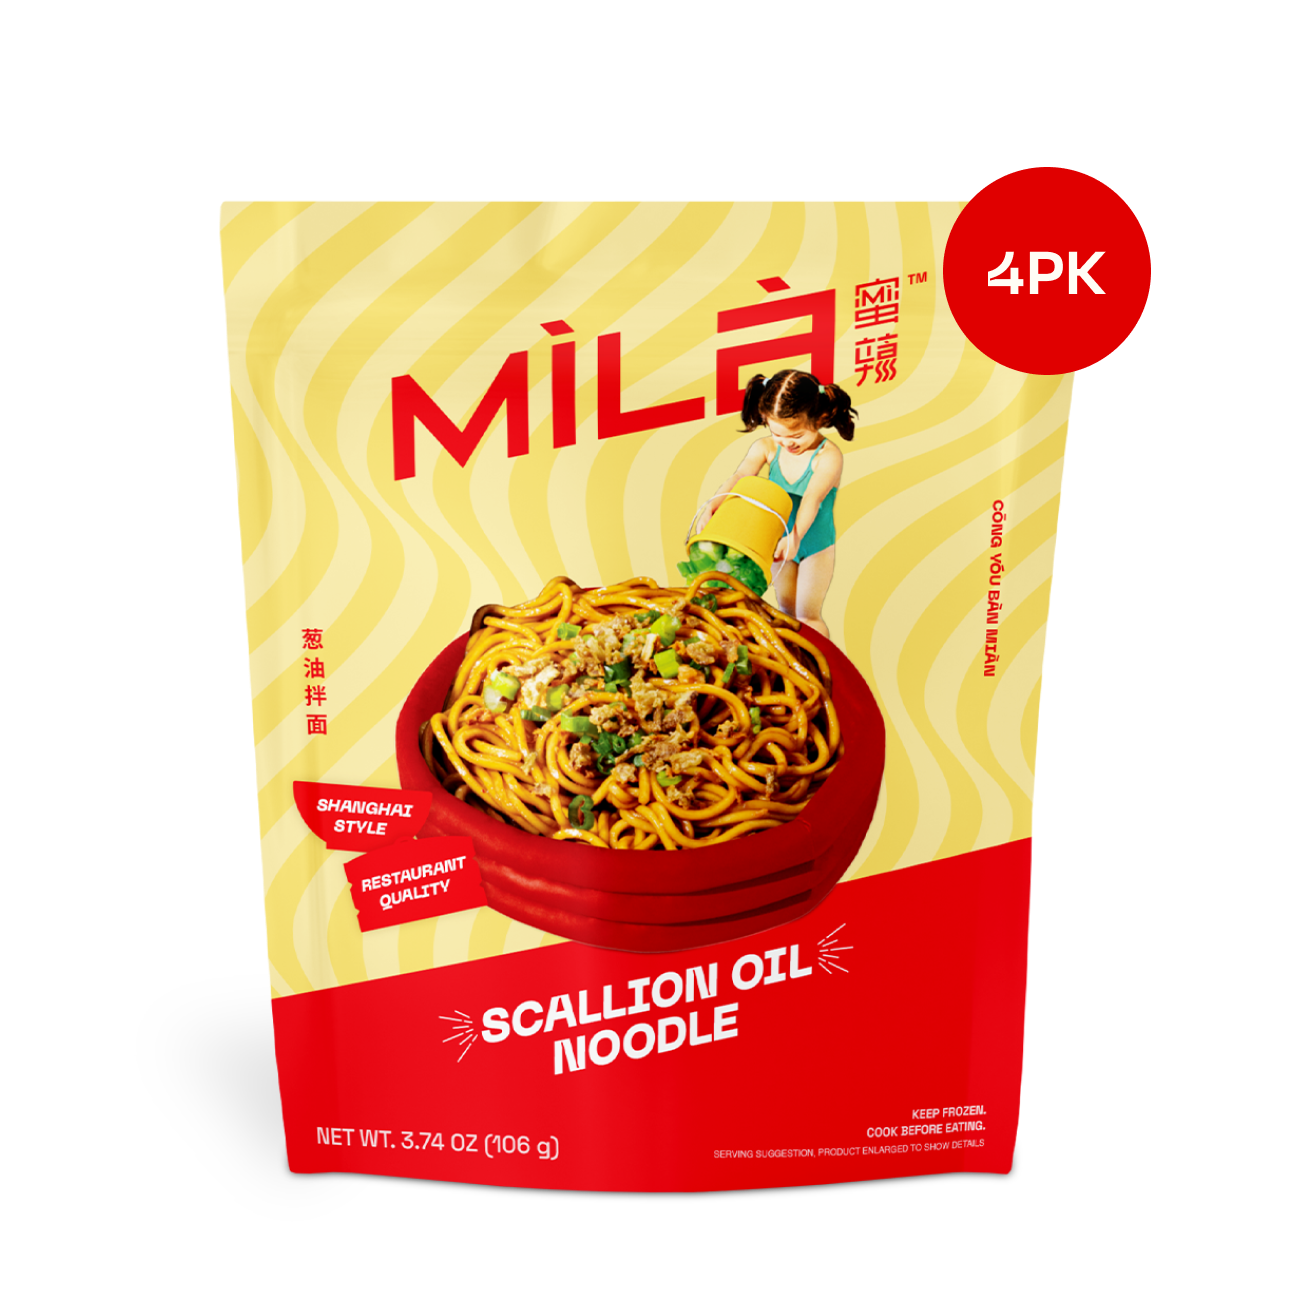 Caramelized Scallion Oil Noodle / Impossible™ Meat Made From Plants